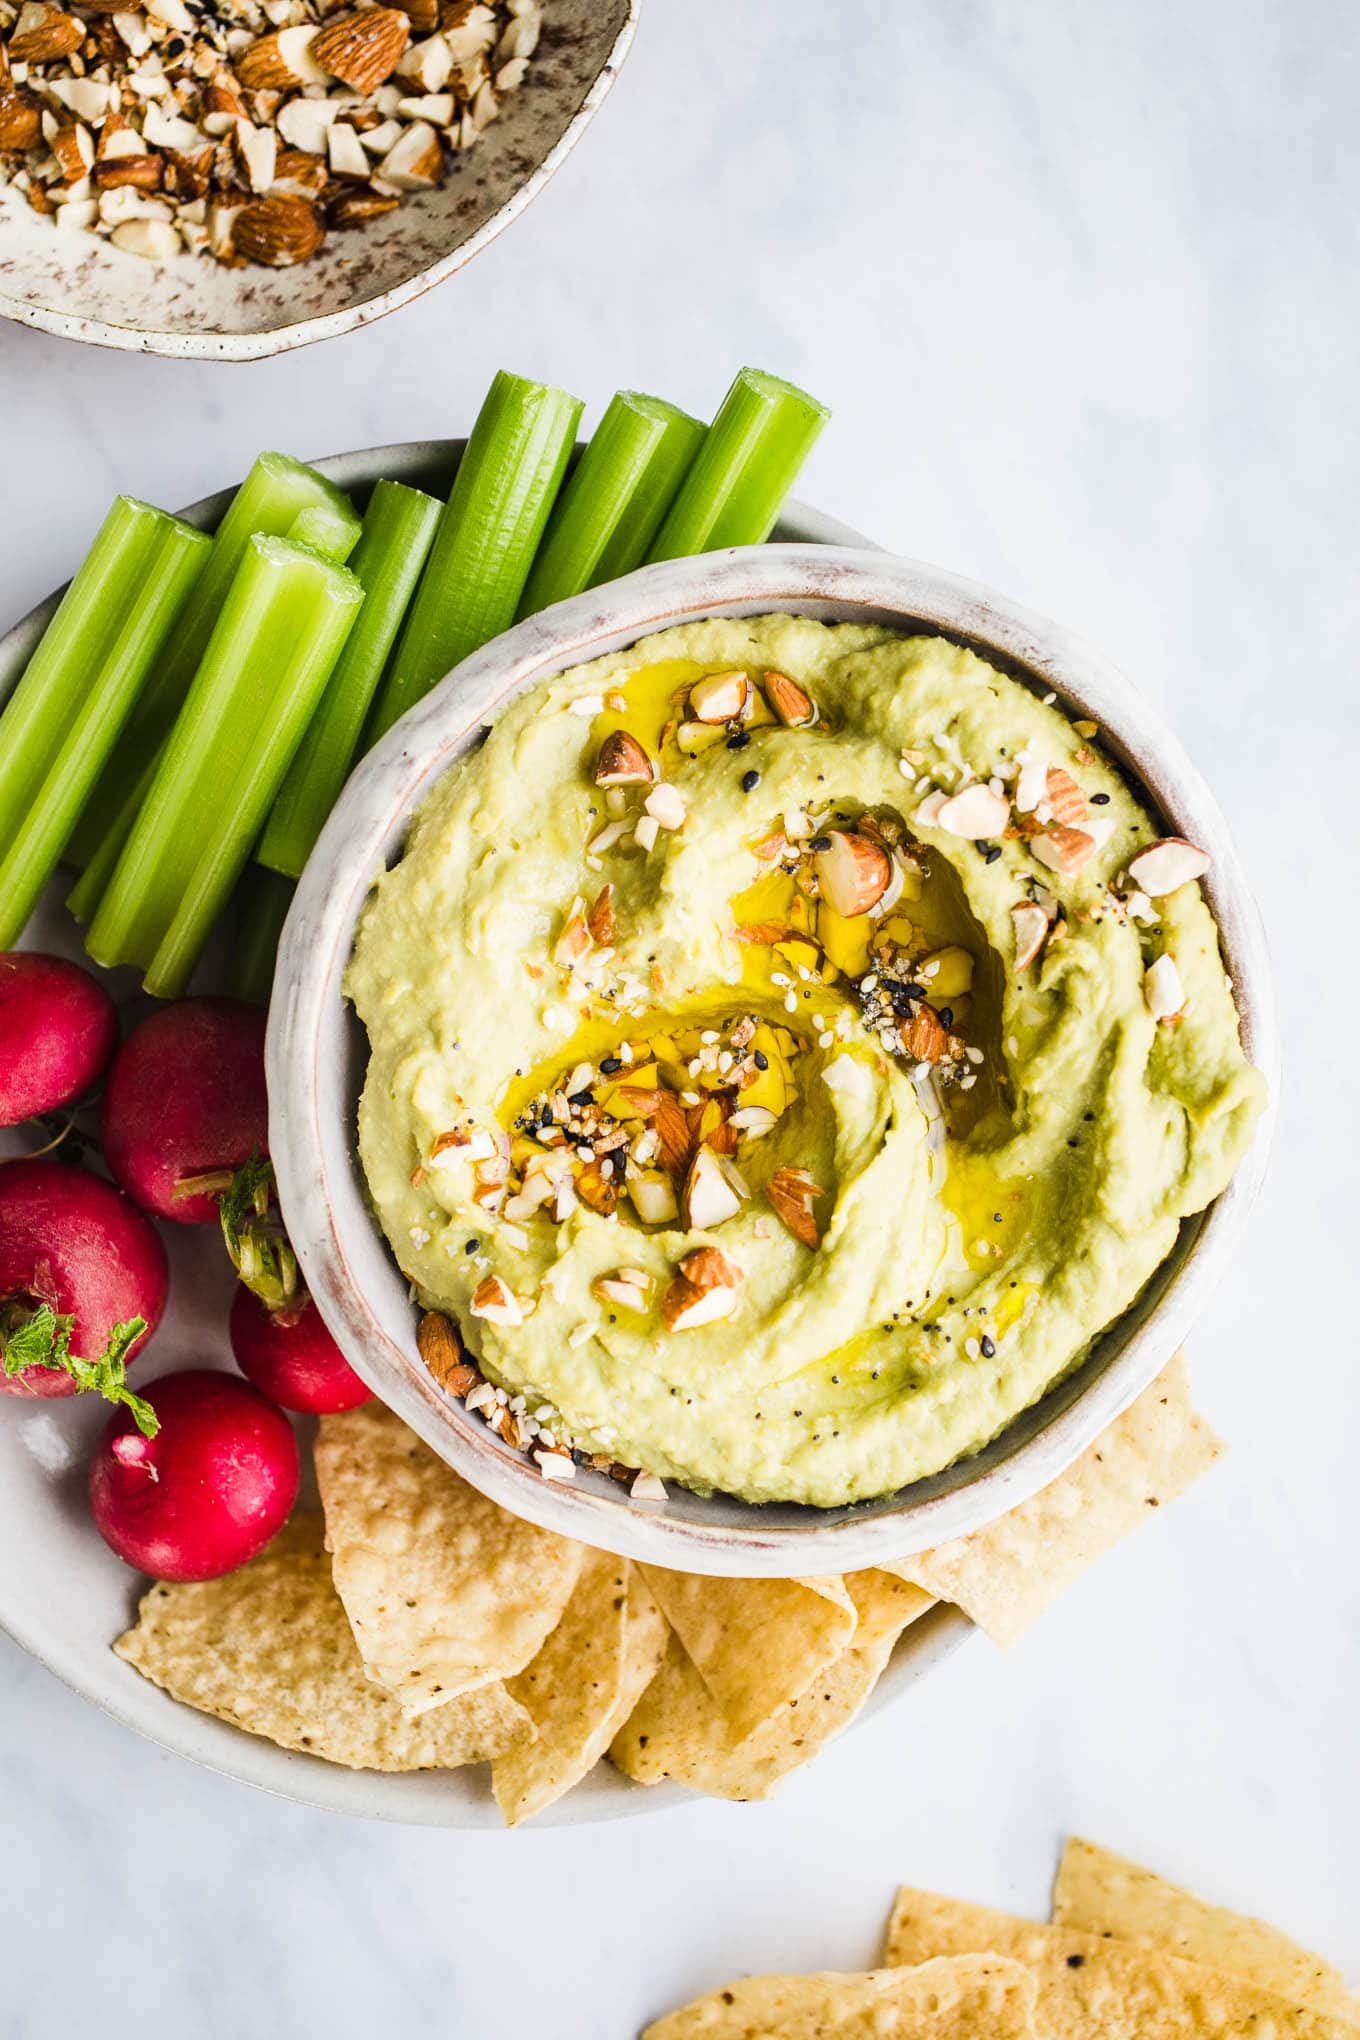 Green avocado hummus in a white bowl served with celery, radishes, and tortilla chips.